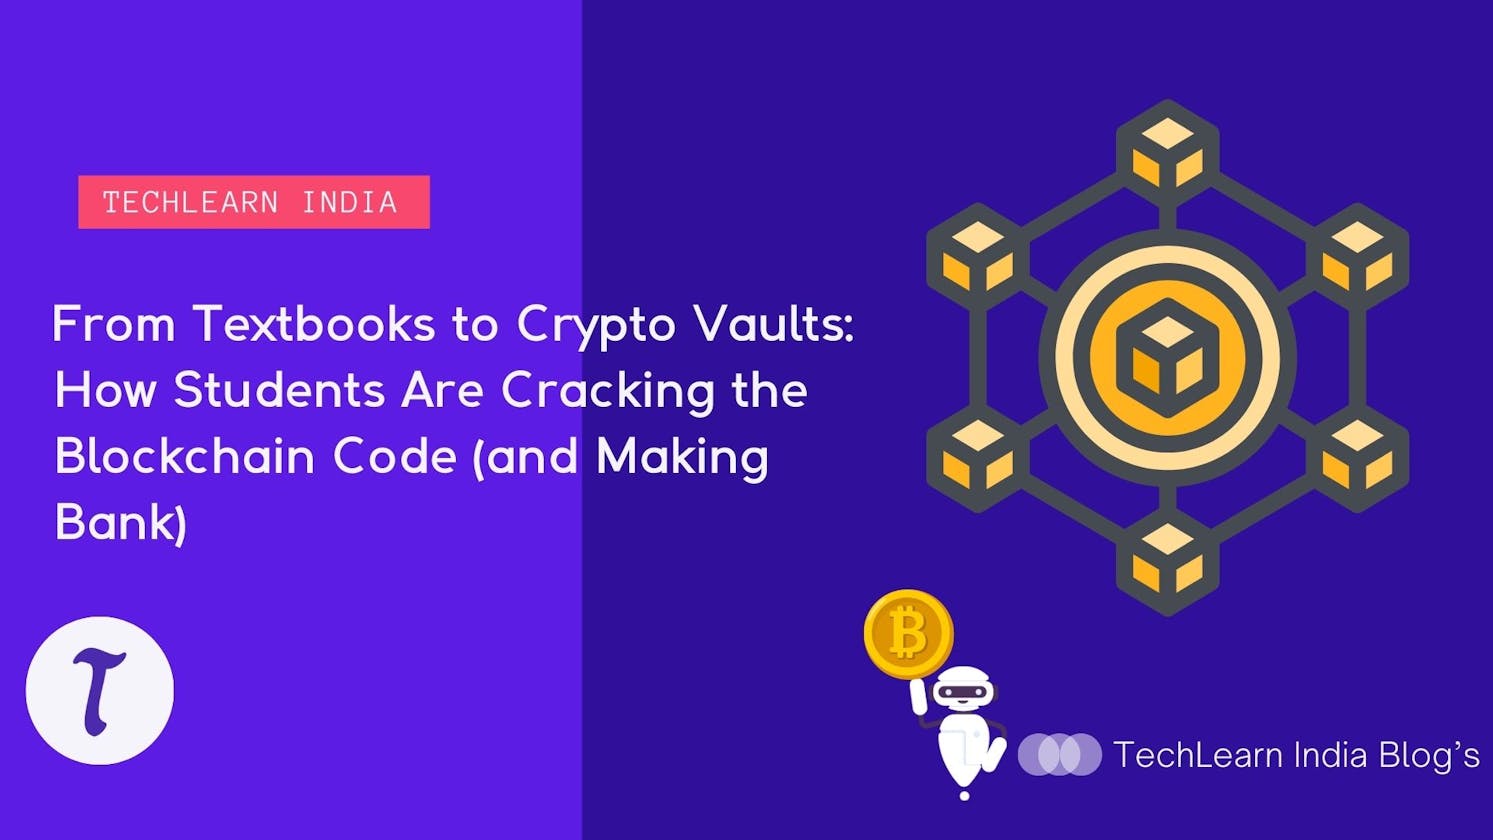 From Textbooks to Crypto Vaults: How Students Are Cracking the Blockchain Code (and Making Bank)